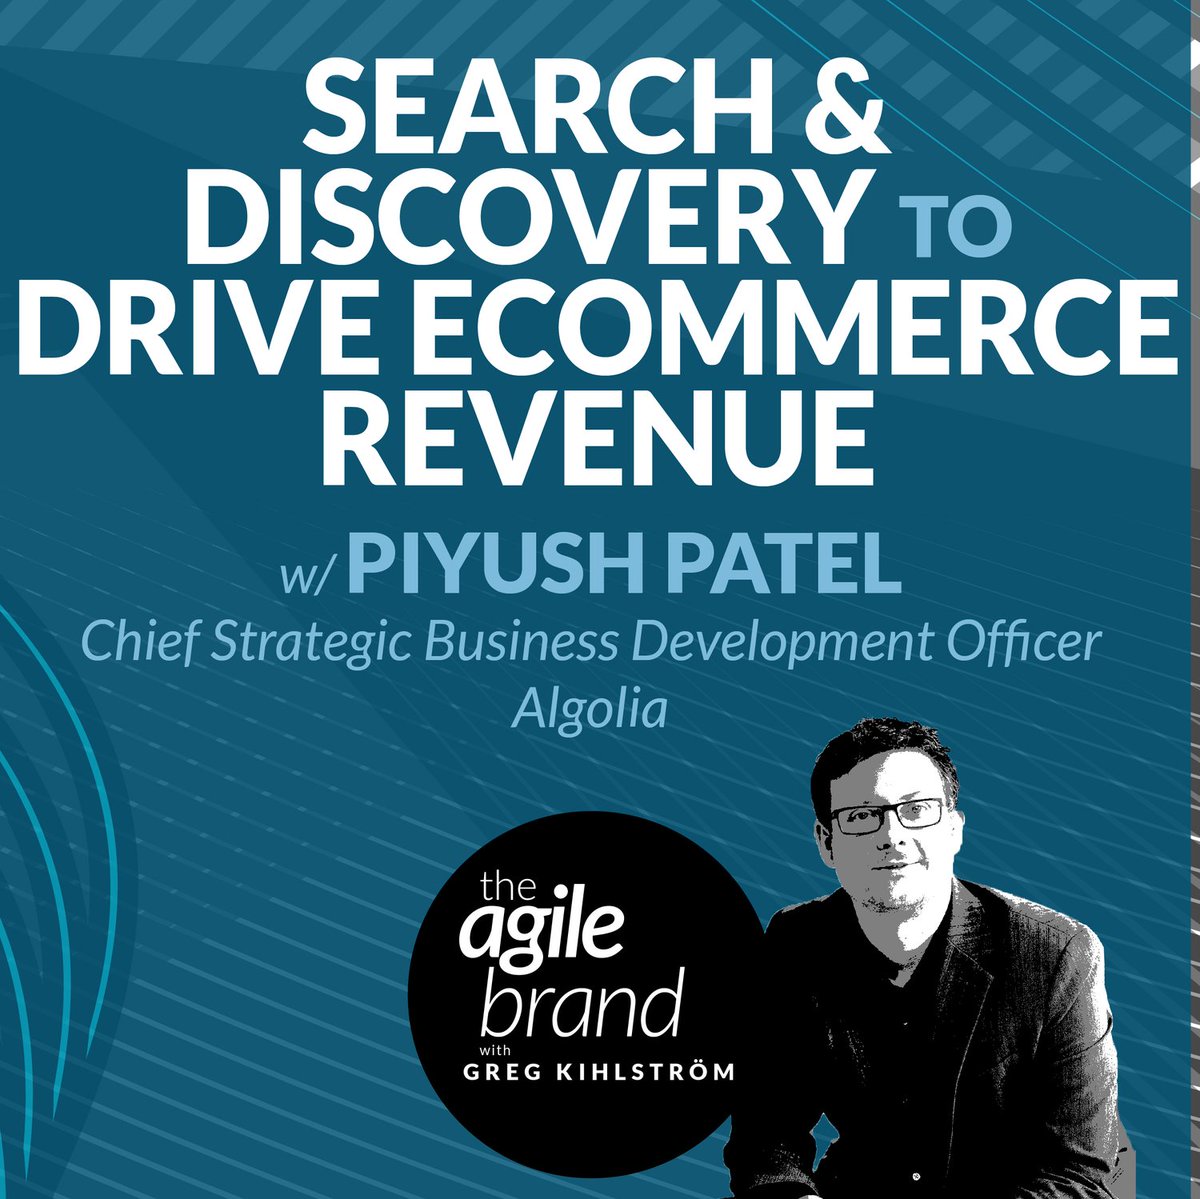 🔊  NEW EPISODE: buff.ly/3AC5V65  Greg Kihlström talks with Piyush Patel at @Algolia about the power of a great #search experience to drive #ecommerce revenue. Check out the latest #podcast episode! 

#enterprisesearch #UX #CX #customerexperience #CXStrategy #strategy